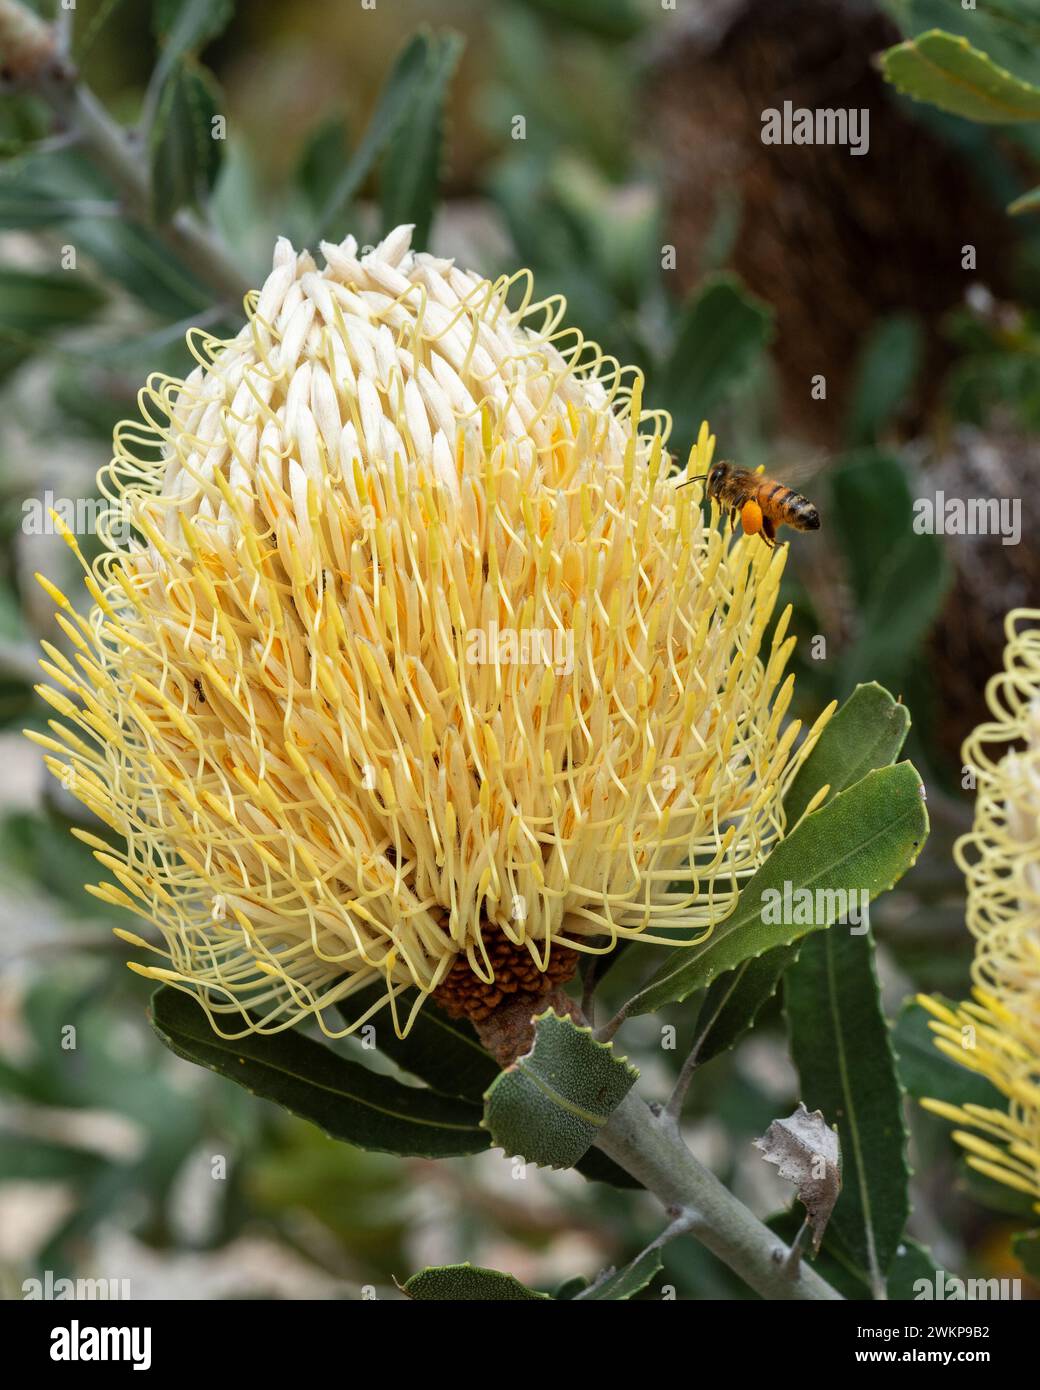 A bee with full pollen sacs flying near a yellow Banksia Flower in Summer, Australia Stock Photo